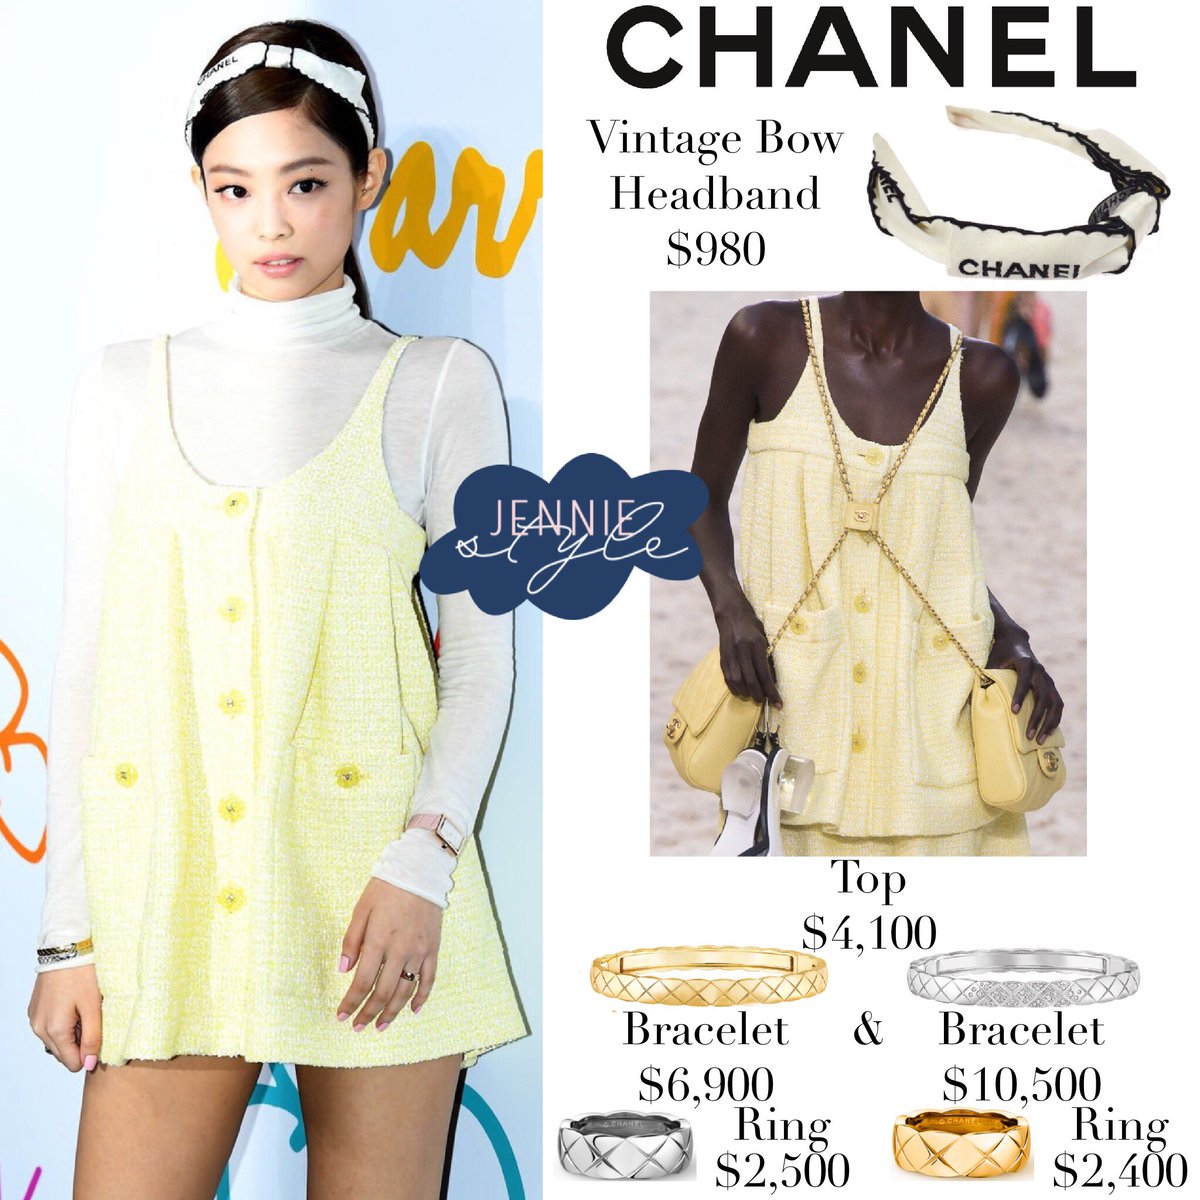 JENNIEKIMJENNIE on X: Omo!!! So not only the ribbon brooch and earrings  were Chanel, the whole outfit was actually Chanel as well!!! And  surprisingly the outfit was vintage 1994!!! 😮😮😮 The stylist